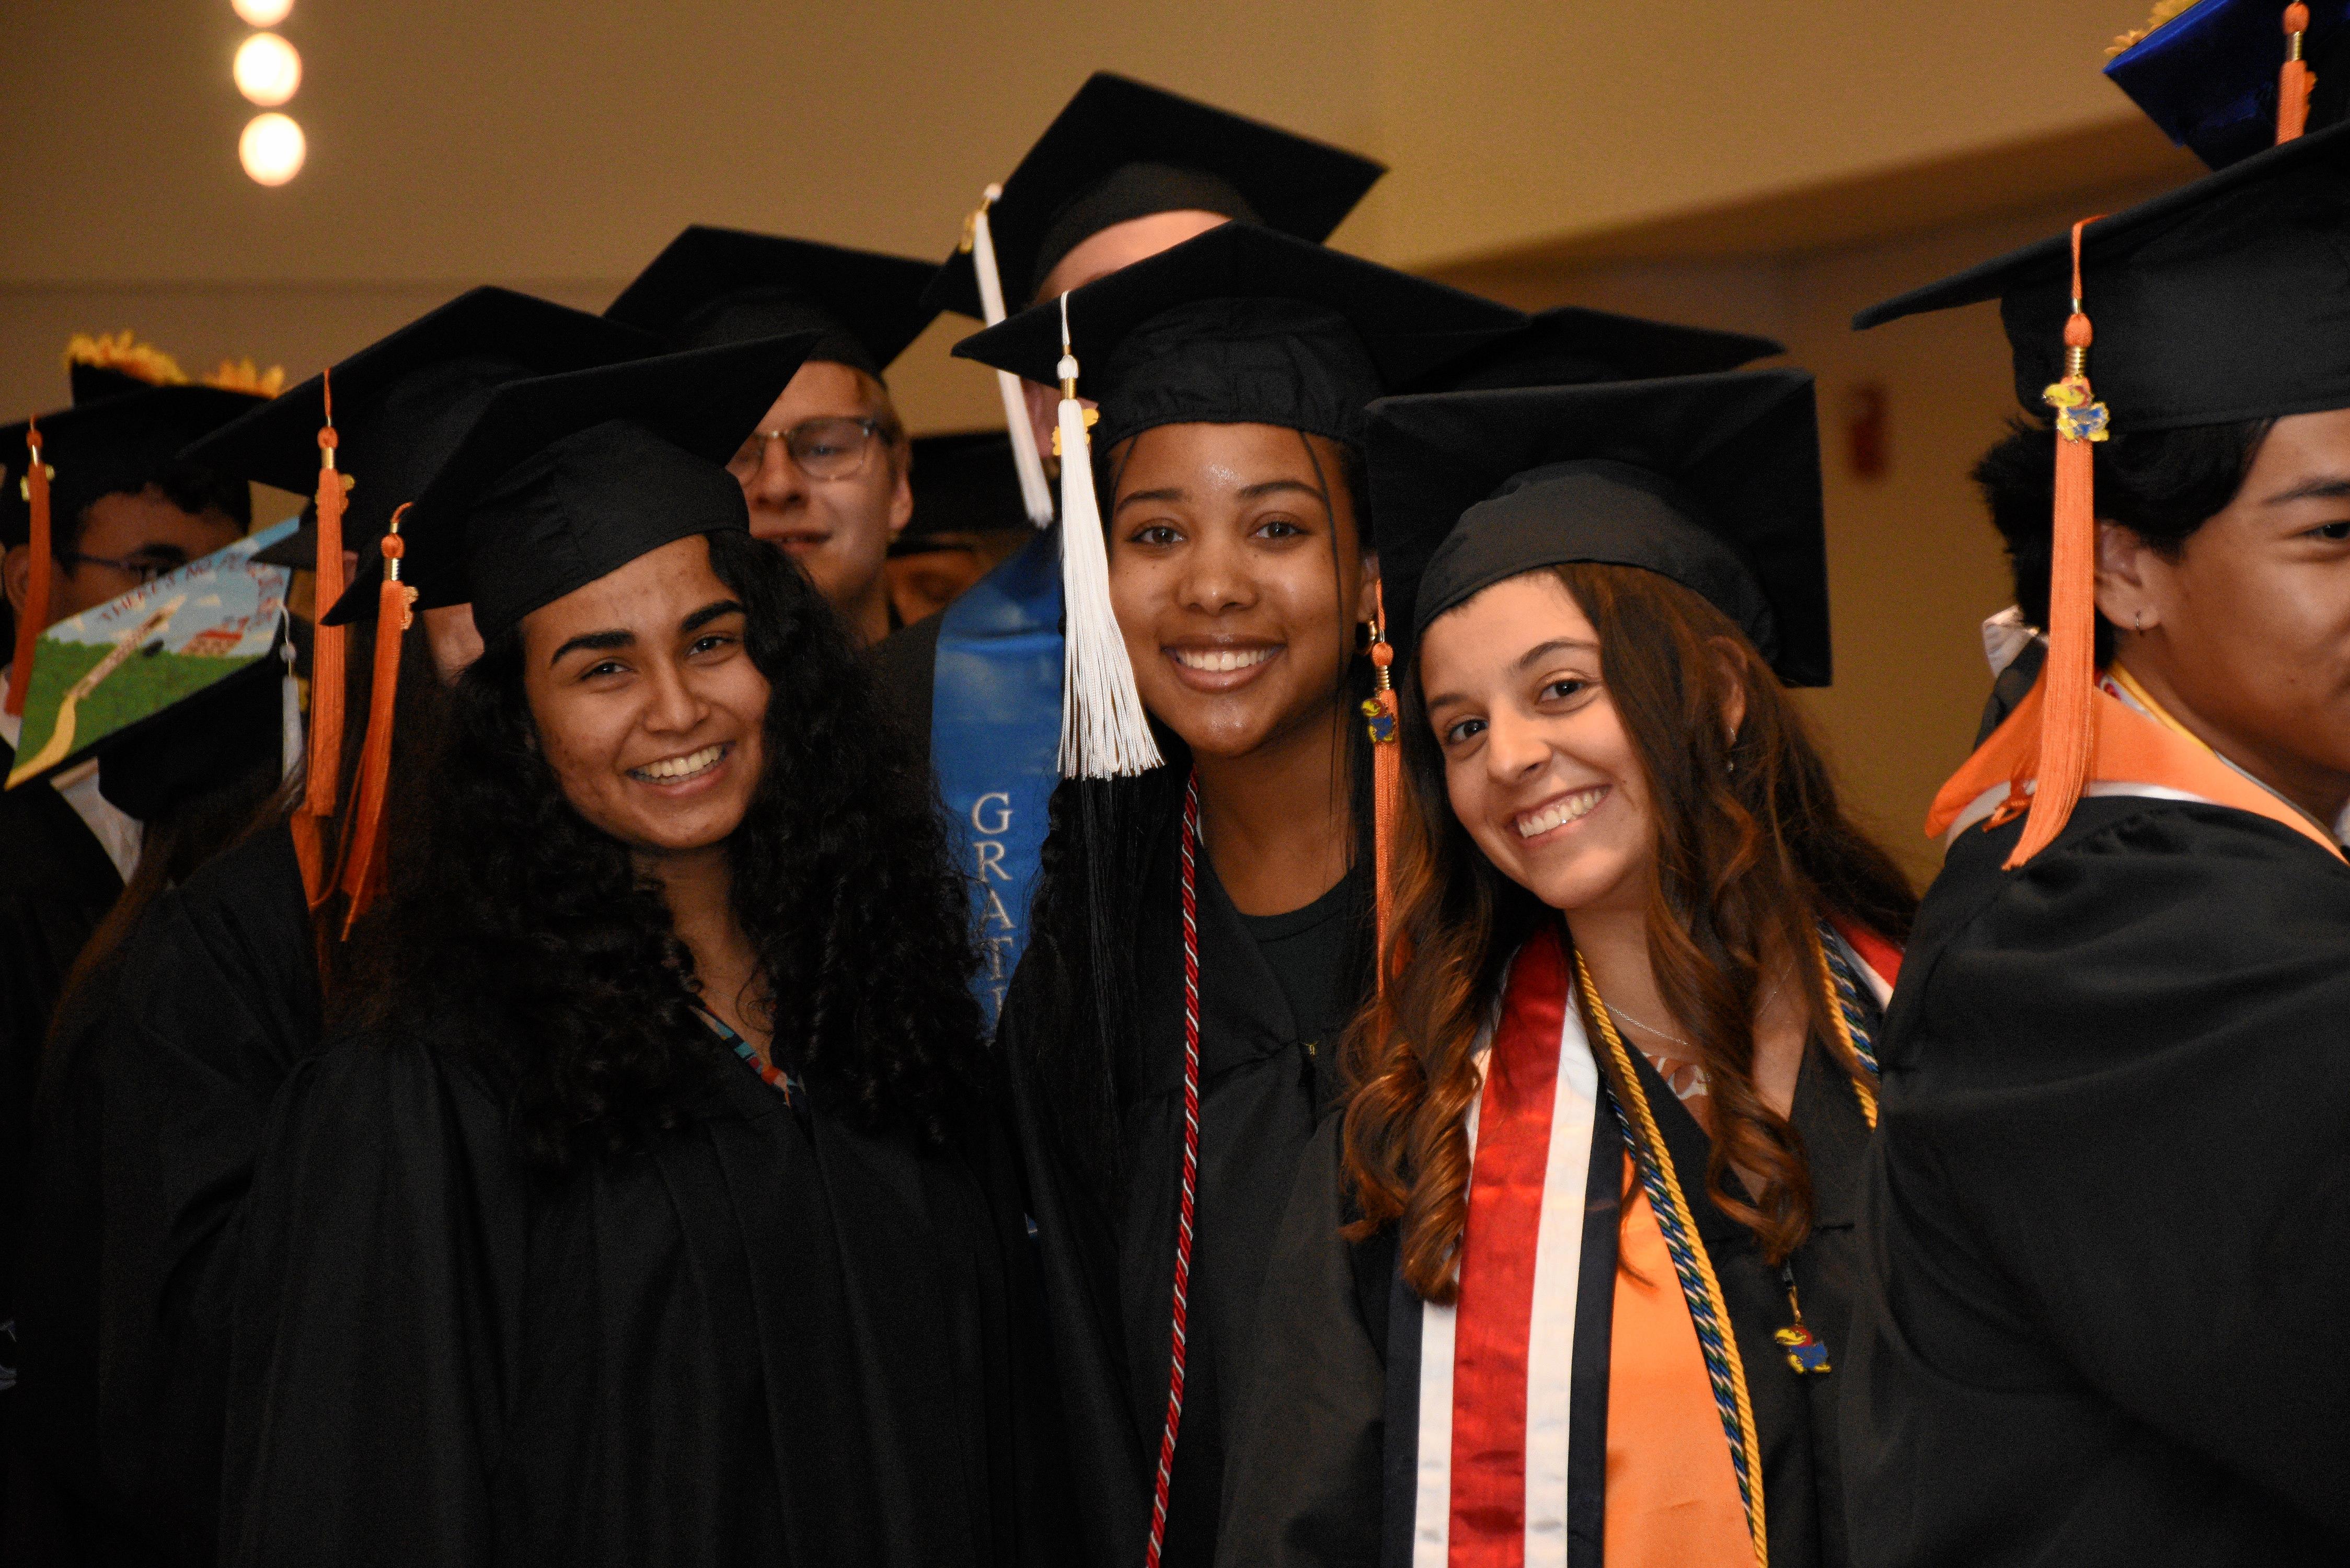 Three women in graduation caps and gowns smile